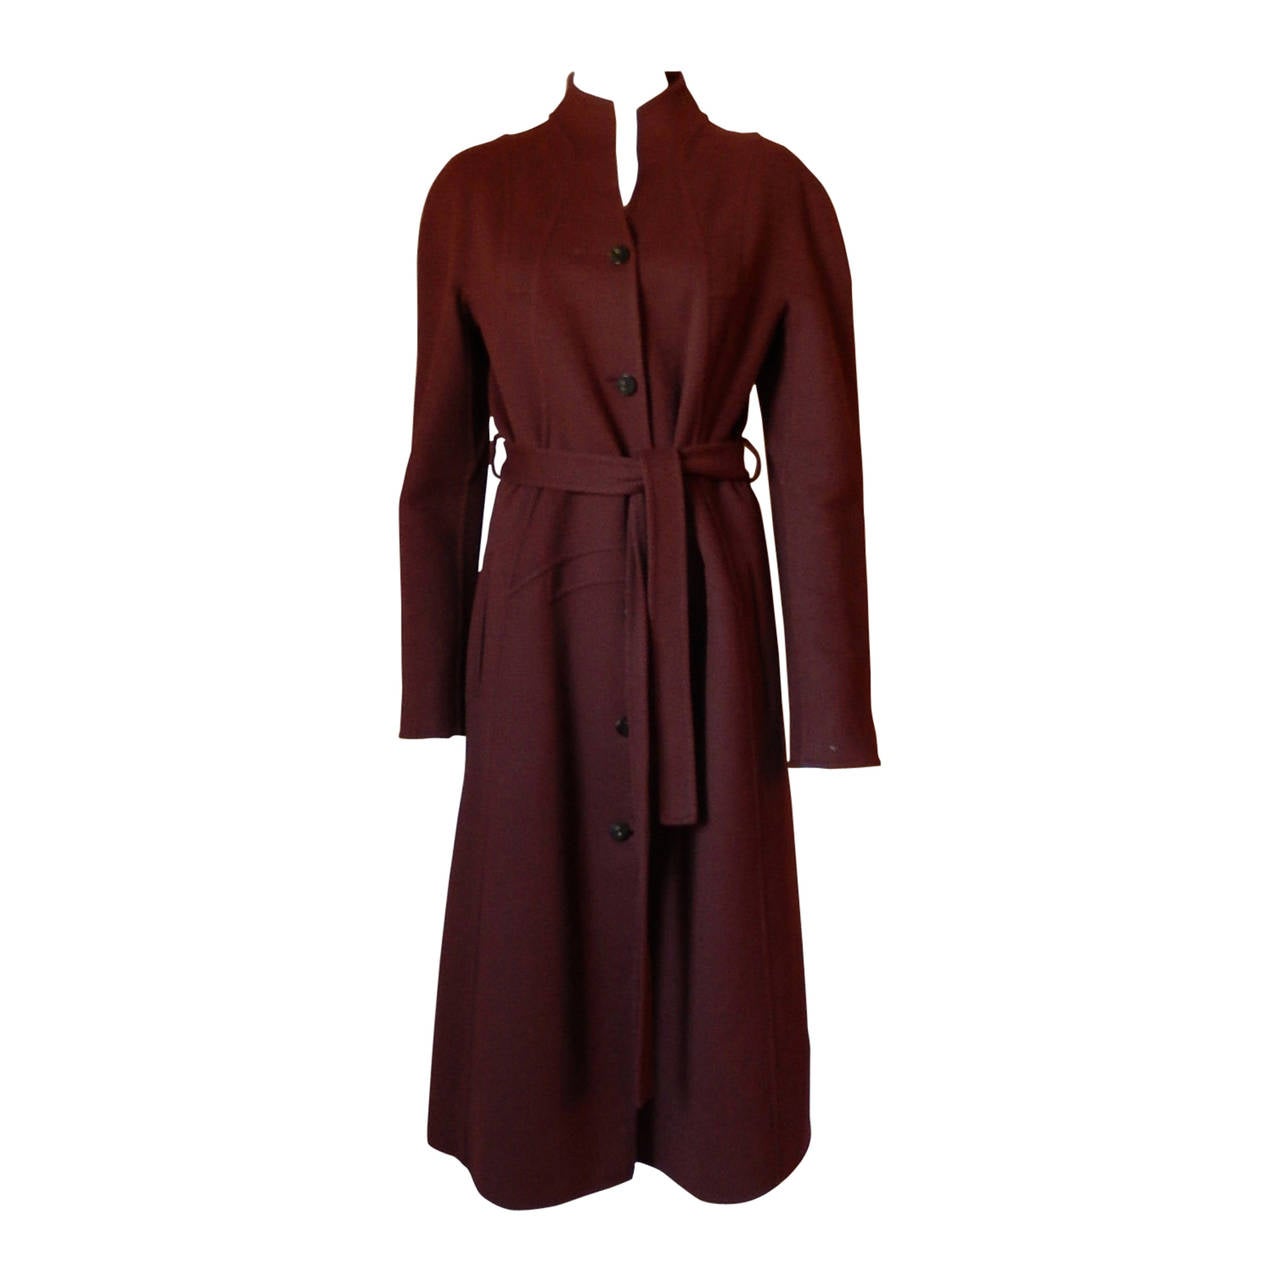 Chado Ralph Rucci 100% Double Faced Cashmere Coat in Maroon For Sale